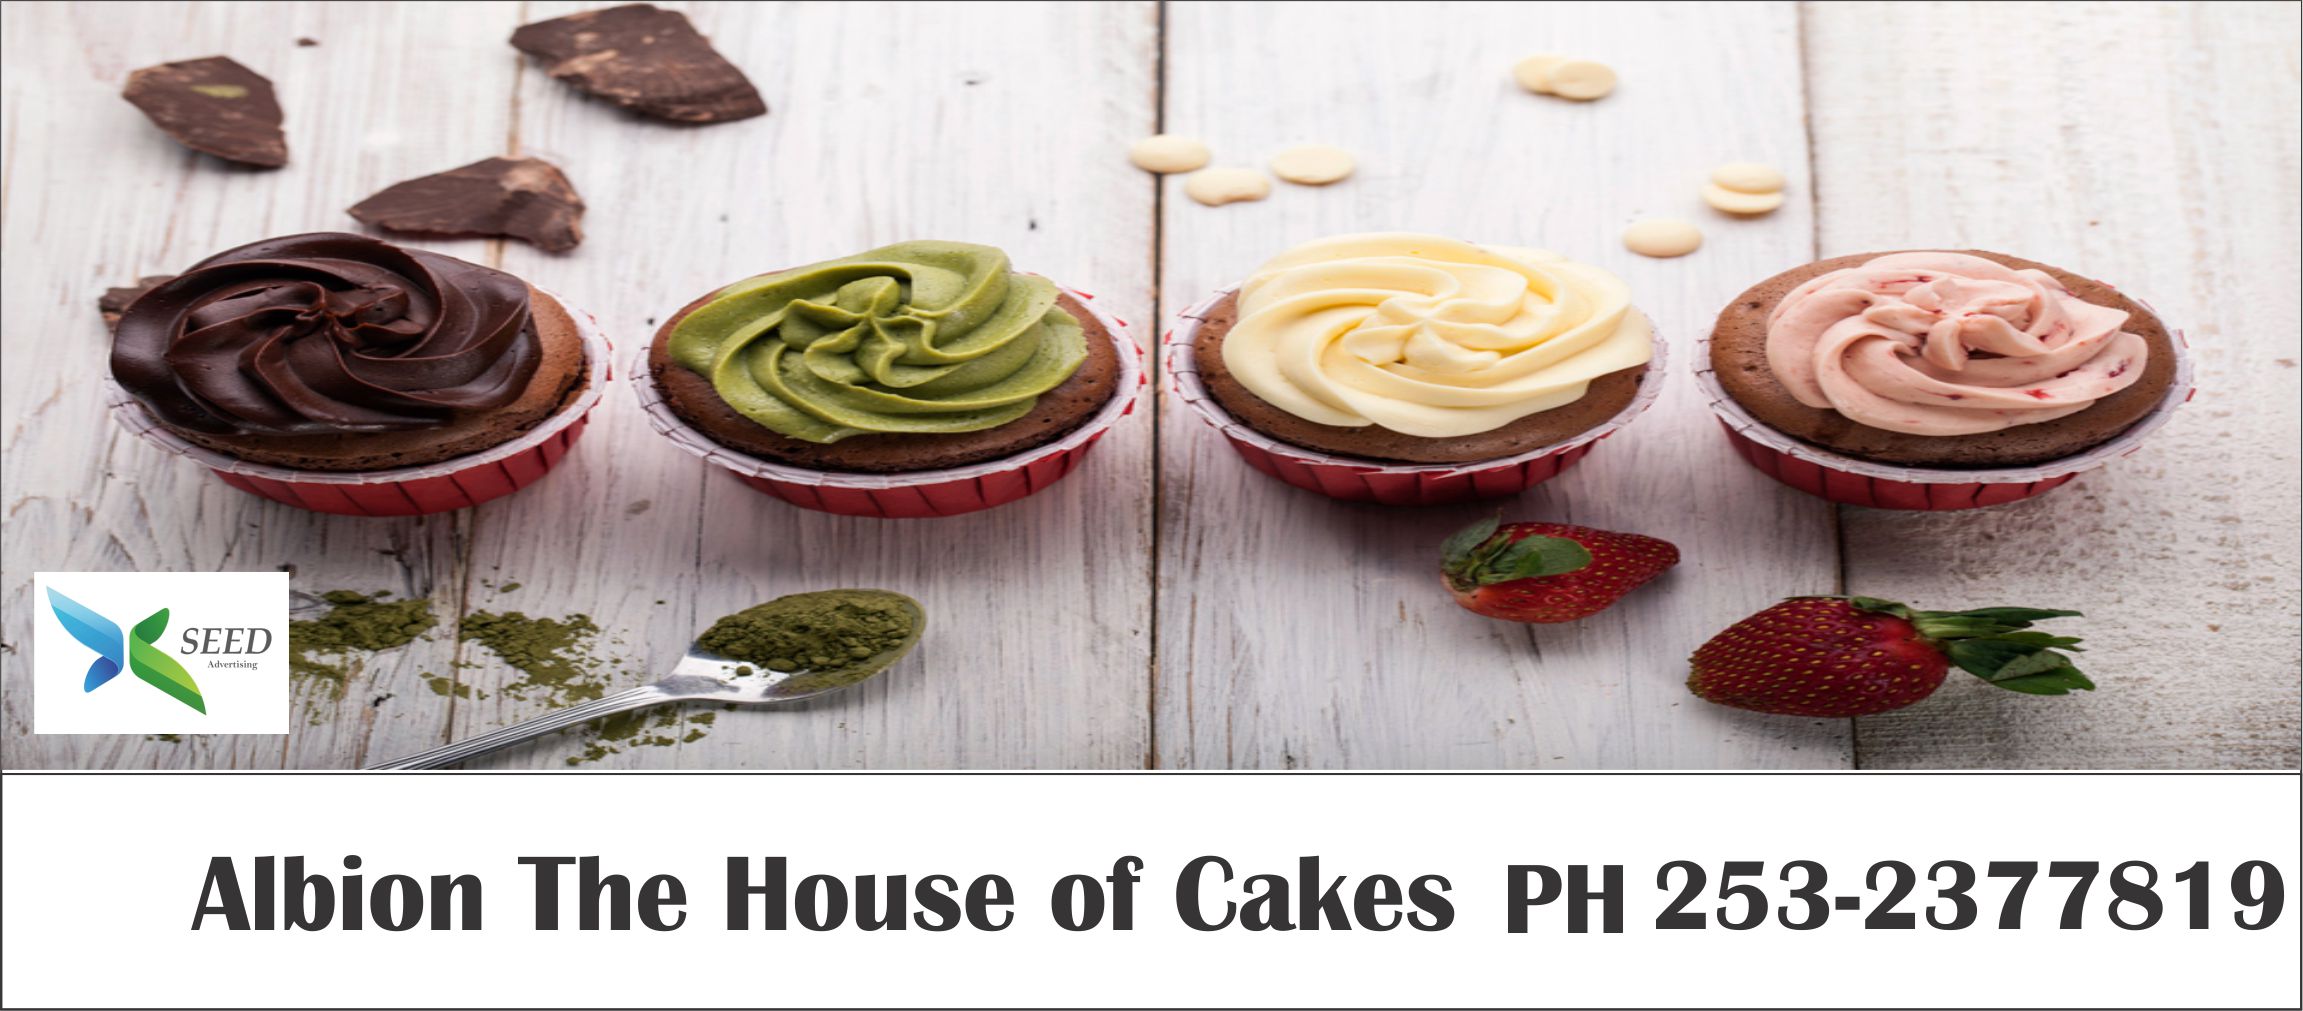 Albion The House of Cakes